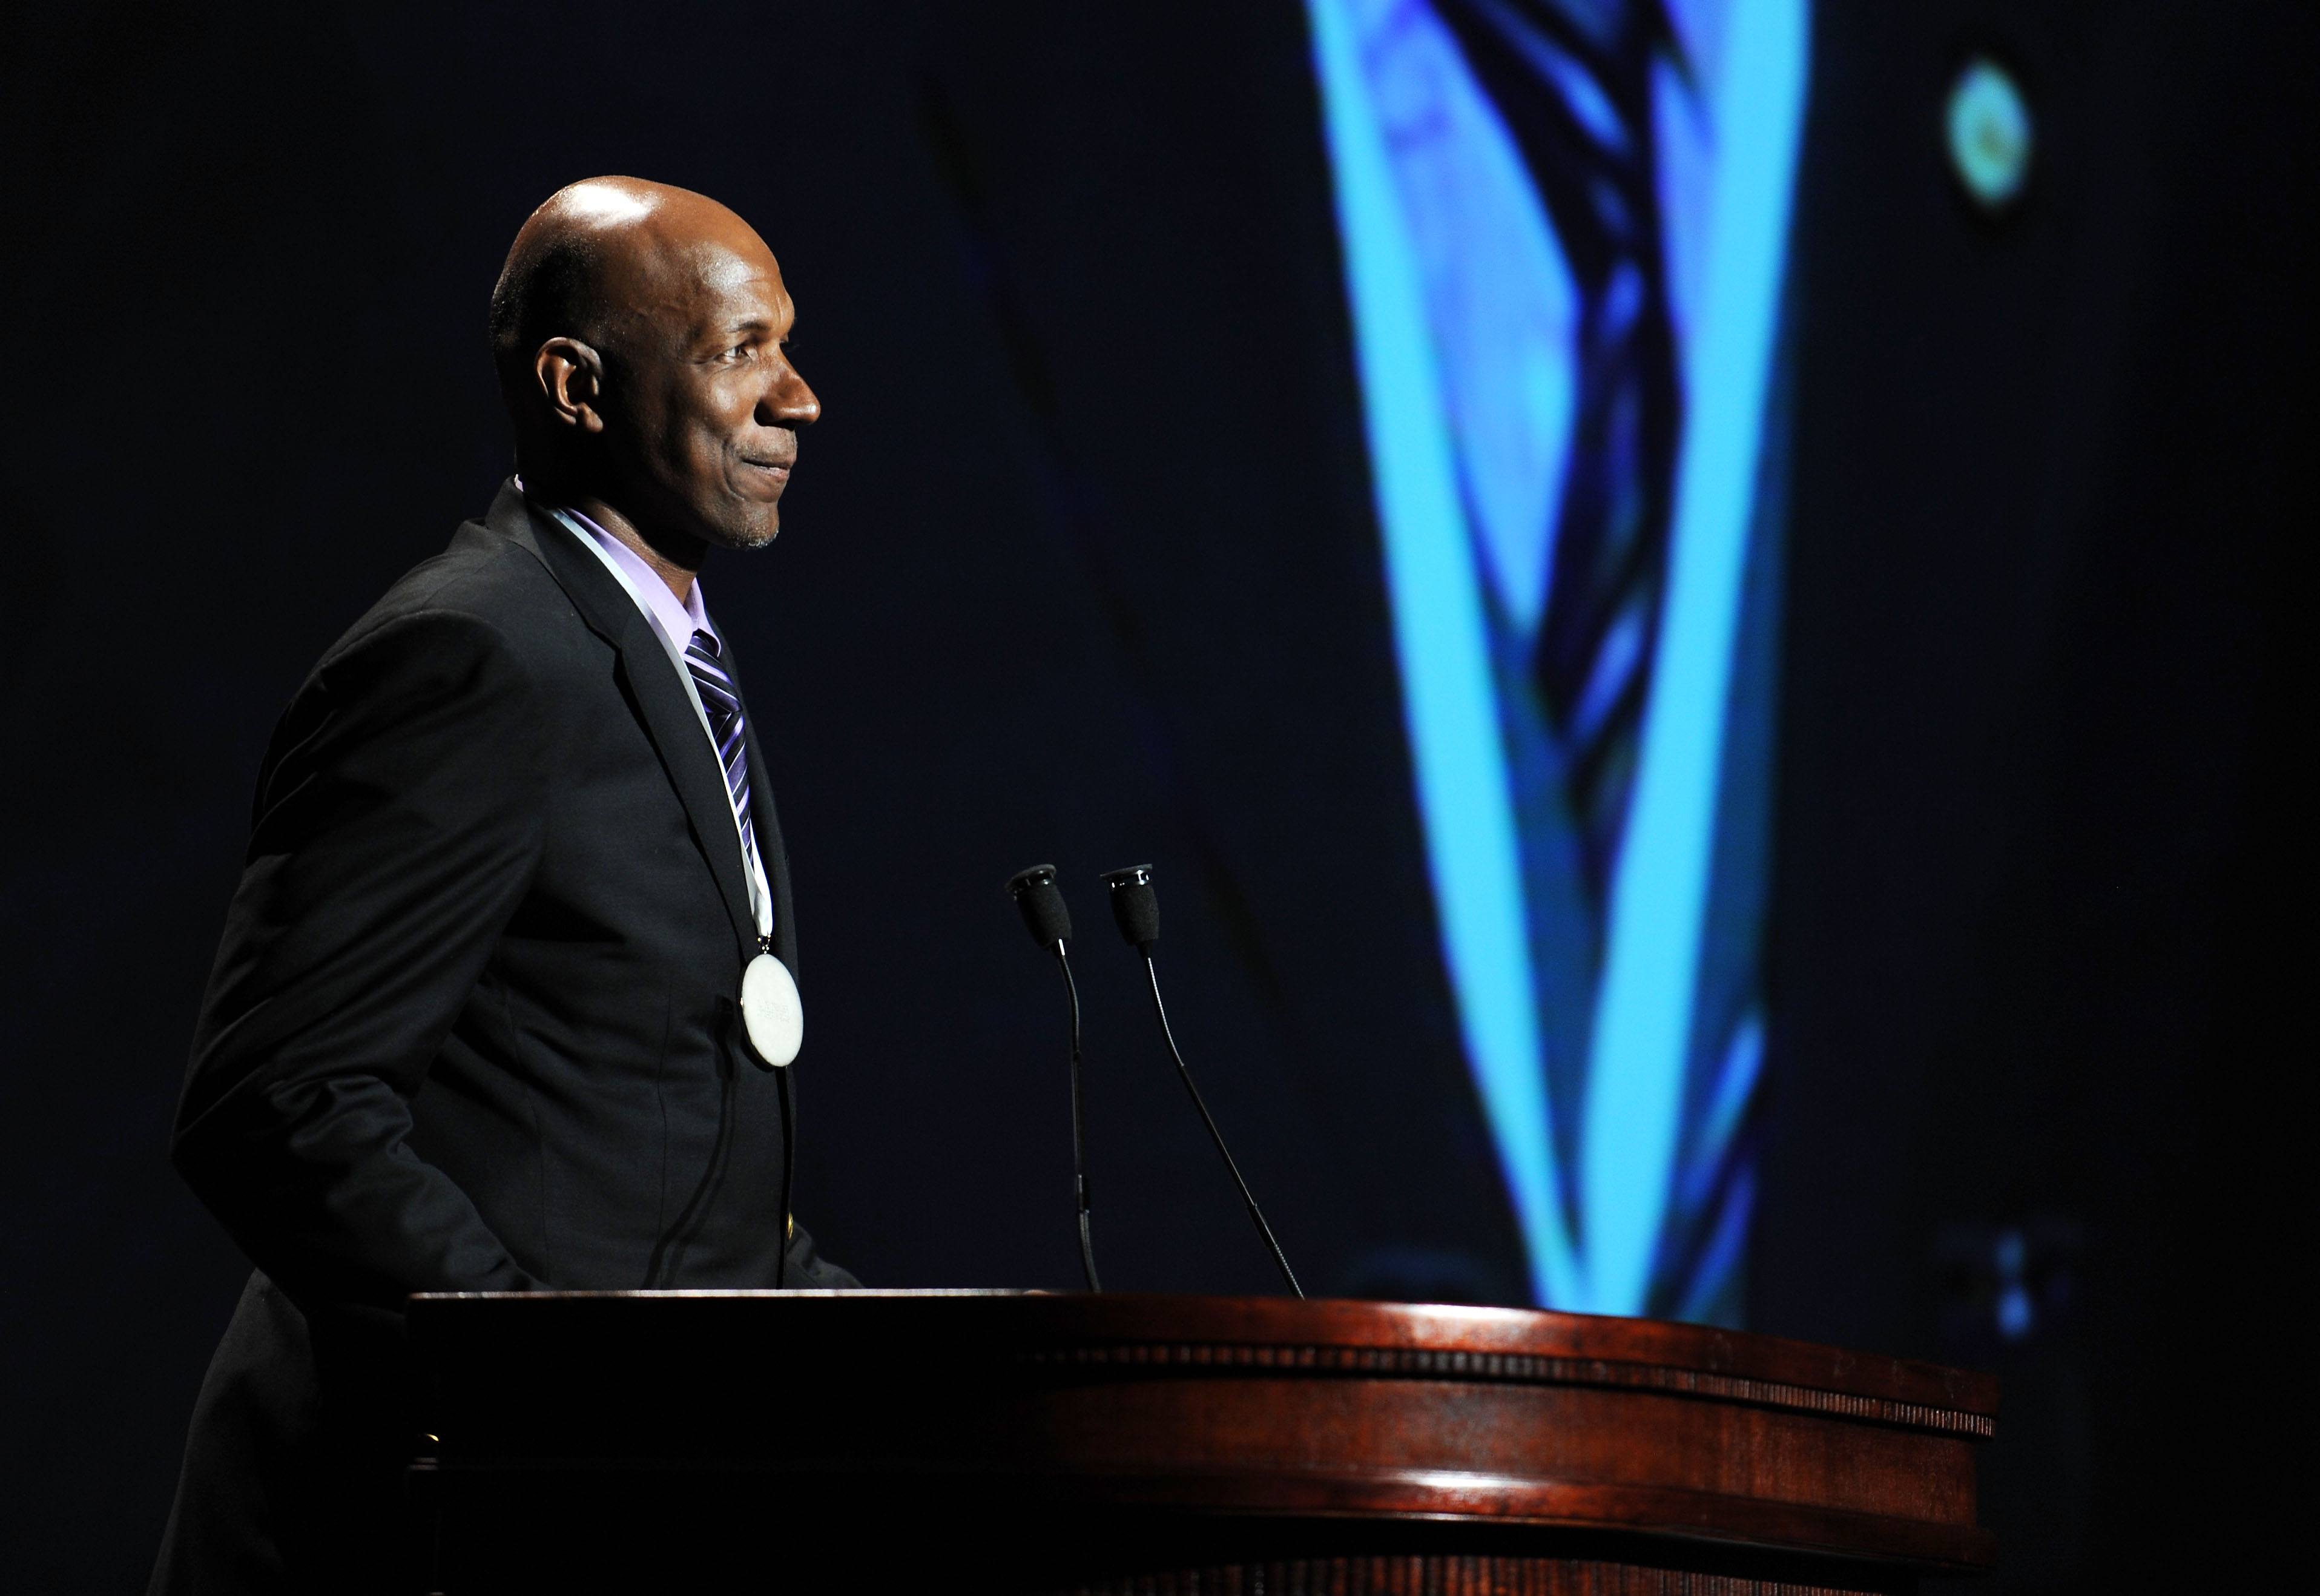 NEW YORK - OCTOBER 06:  Honoree Clyde Drexler speaks at The 24th Annual Great Sports Legends Dinner benefiting The Buoniconti Fund to Cure Paralysis (national fundraising arm of The Miami Project to Cure Paralysis) at The Waldorf=Astoria on October 6, 200